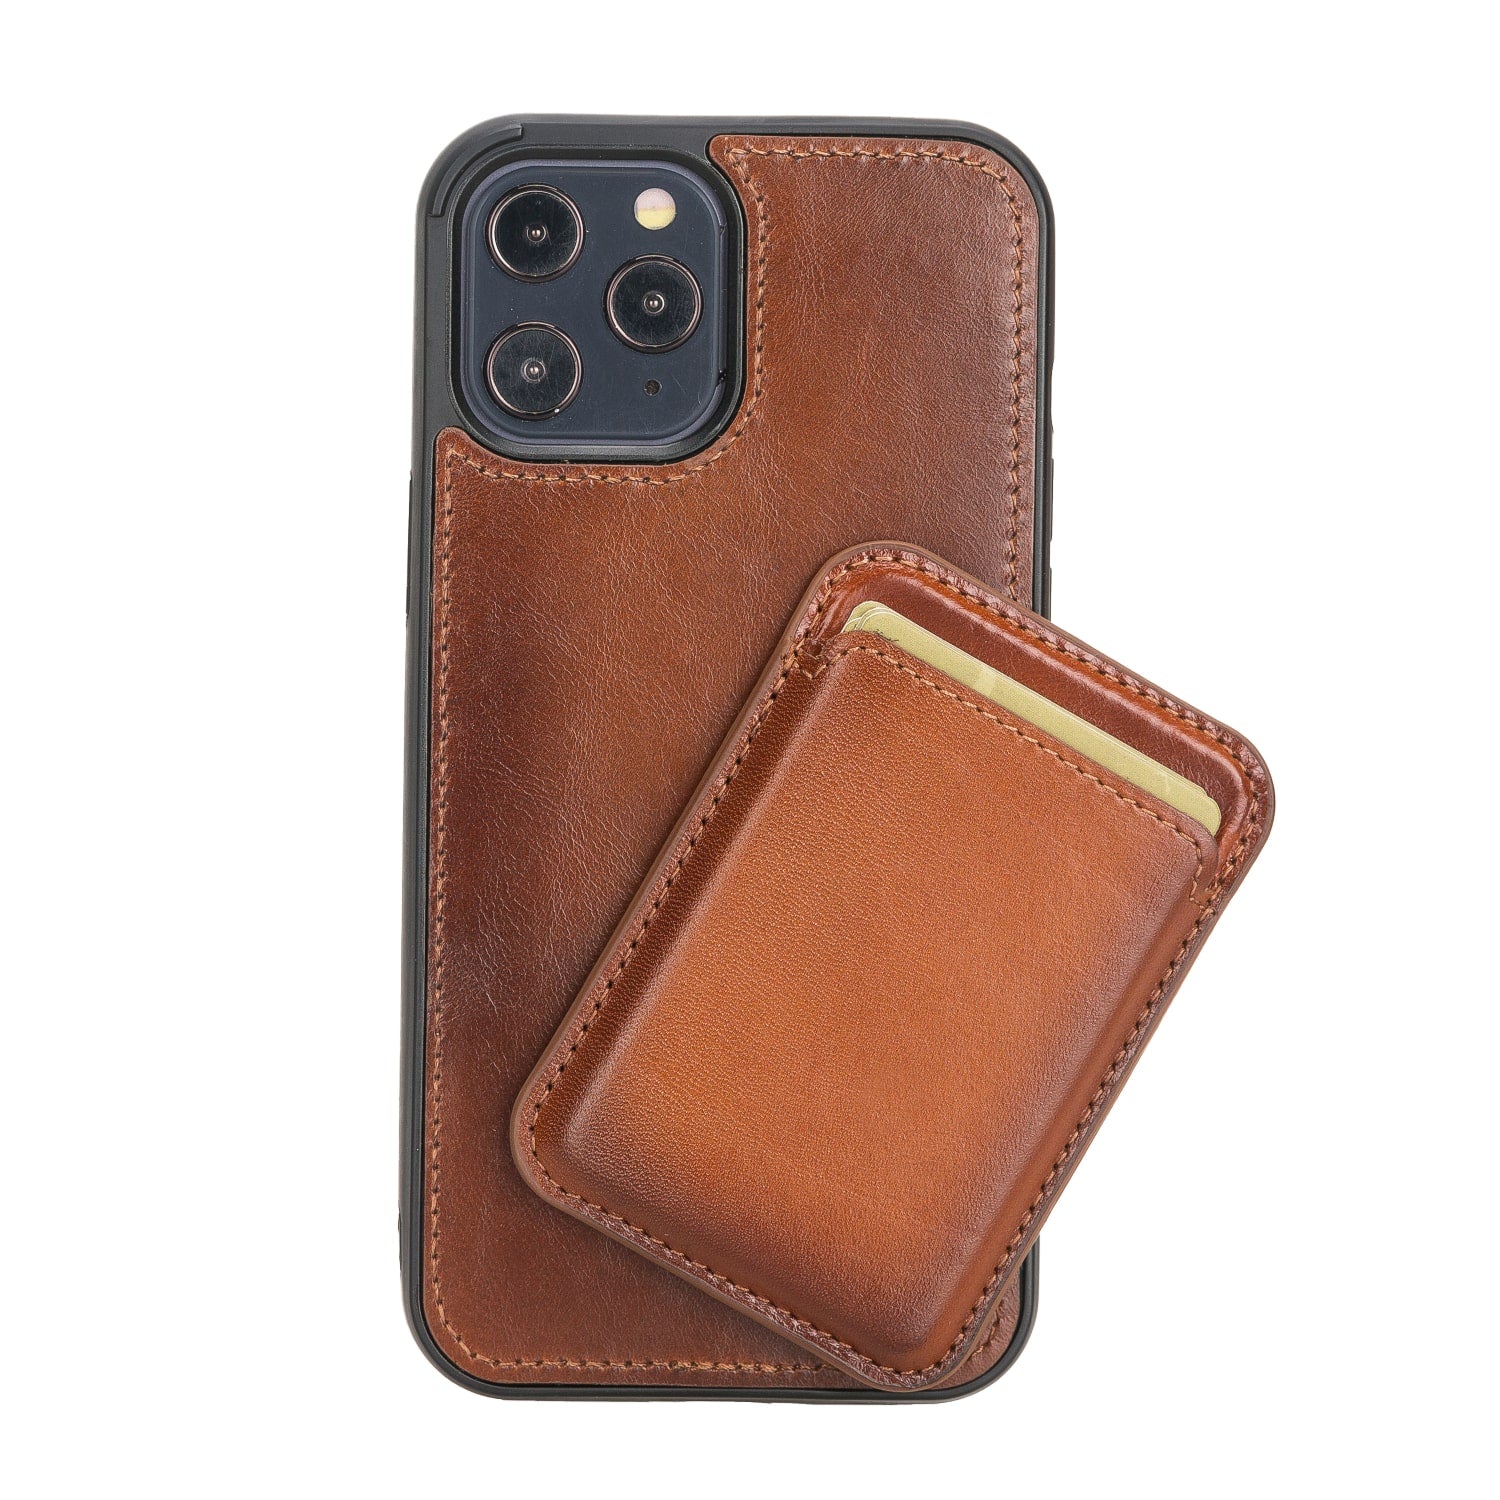 Apple iPhone Leather Wallet with MagSafe cardholder attachment keeps your  ID close » Gadget Flow